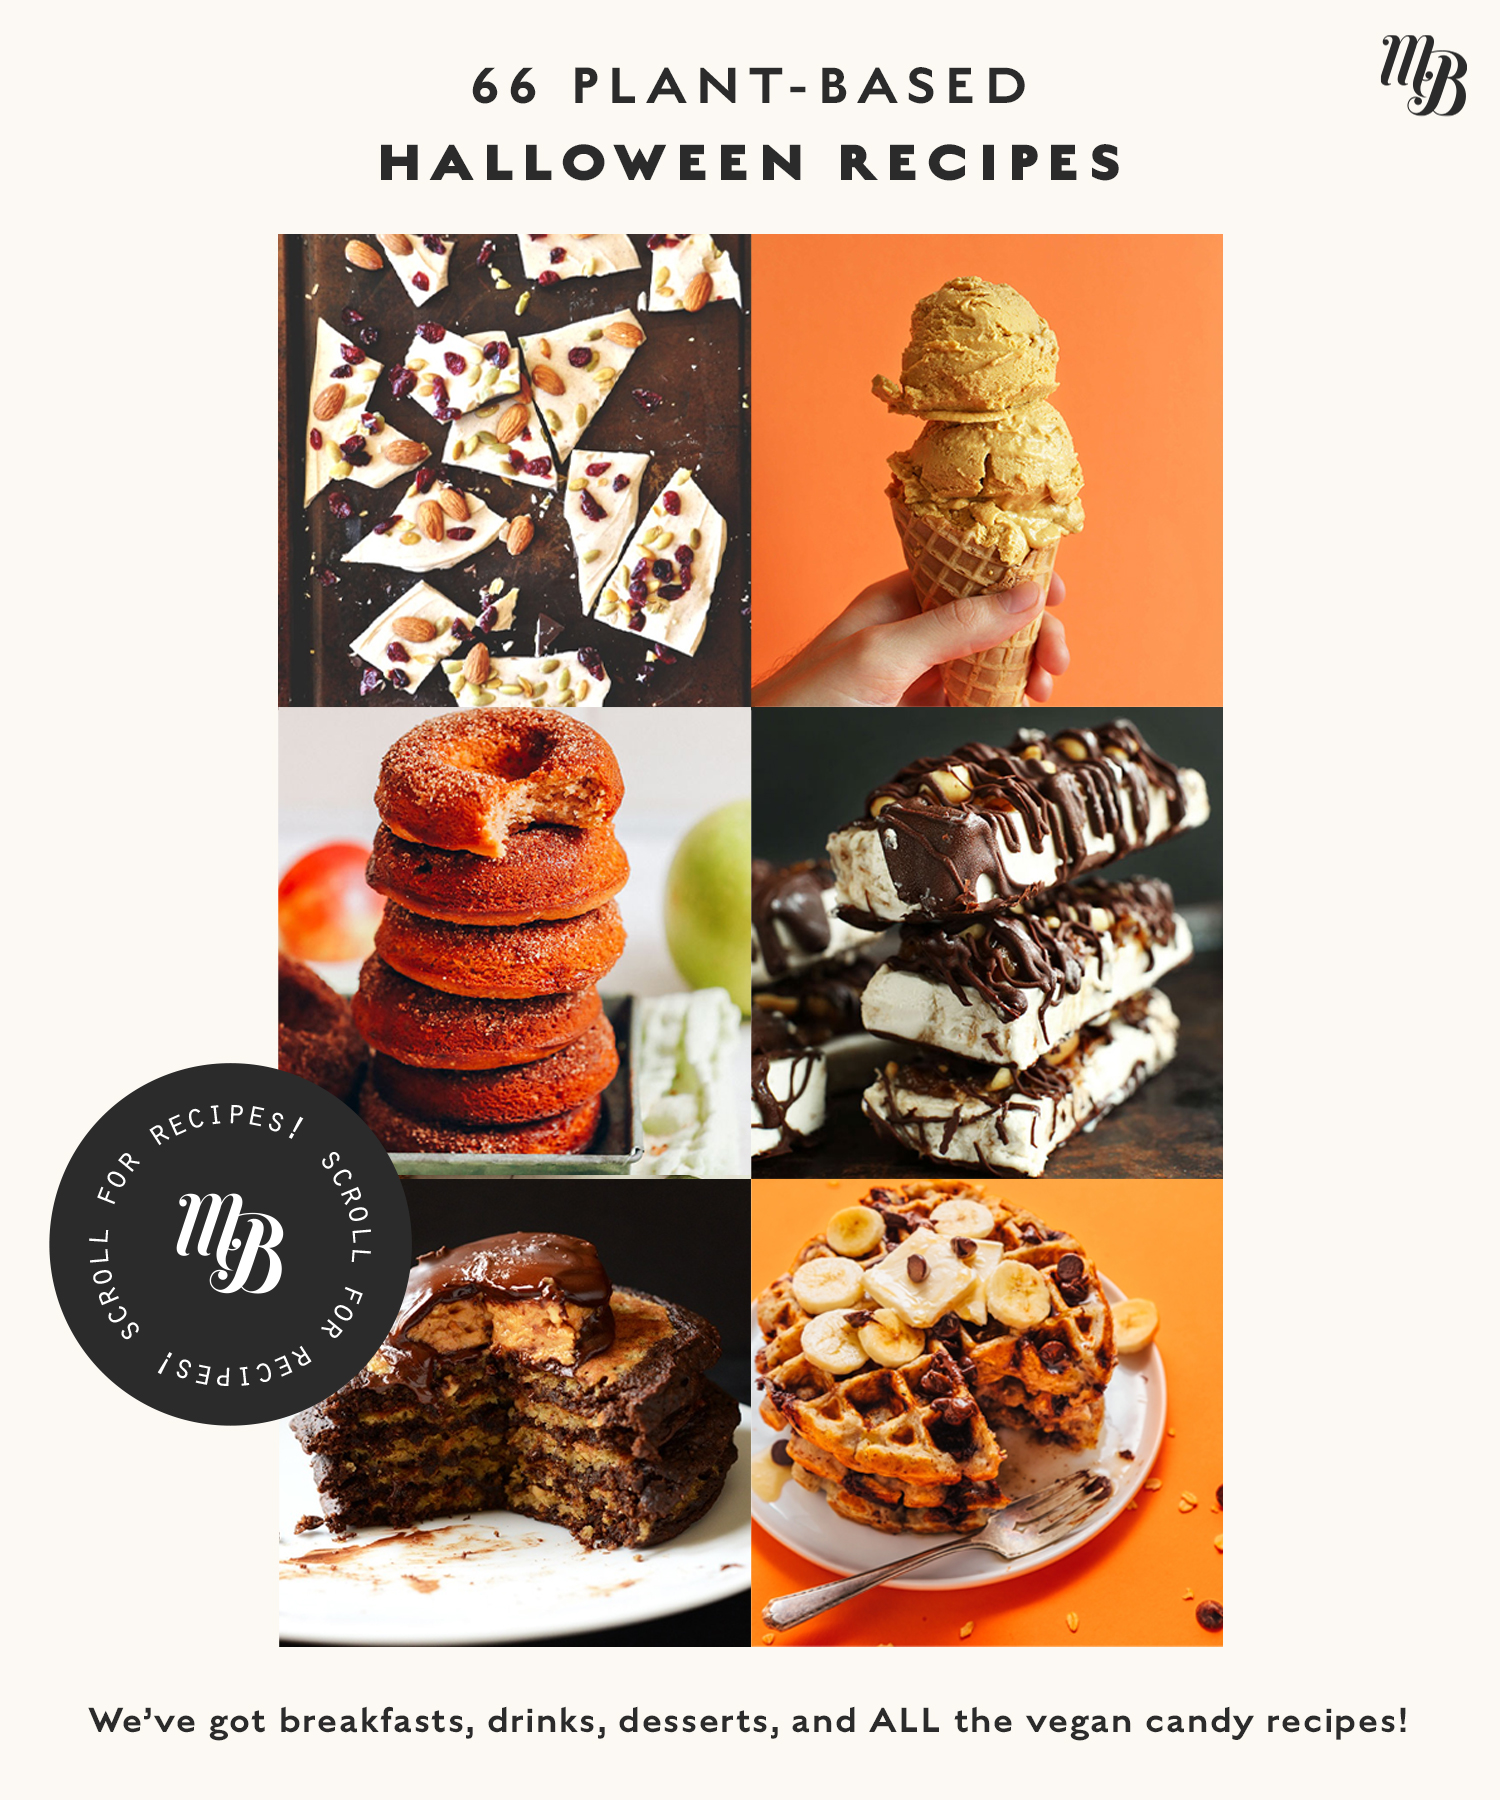 Assortment of recipes perfect for Halloween